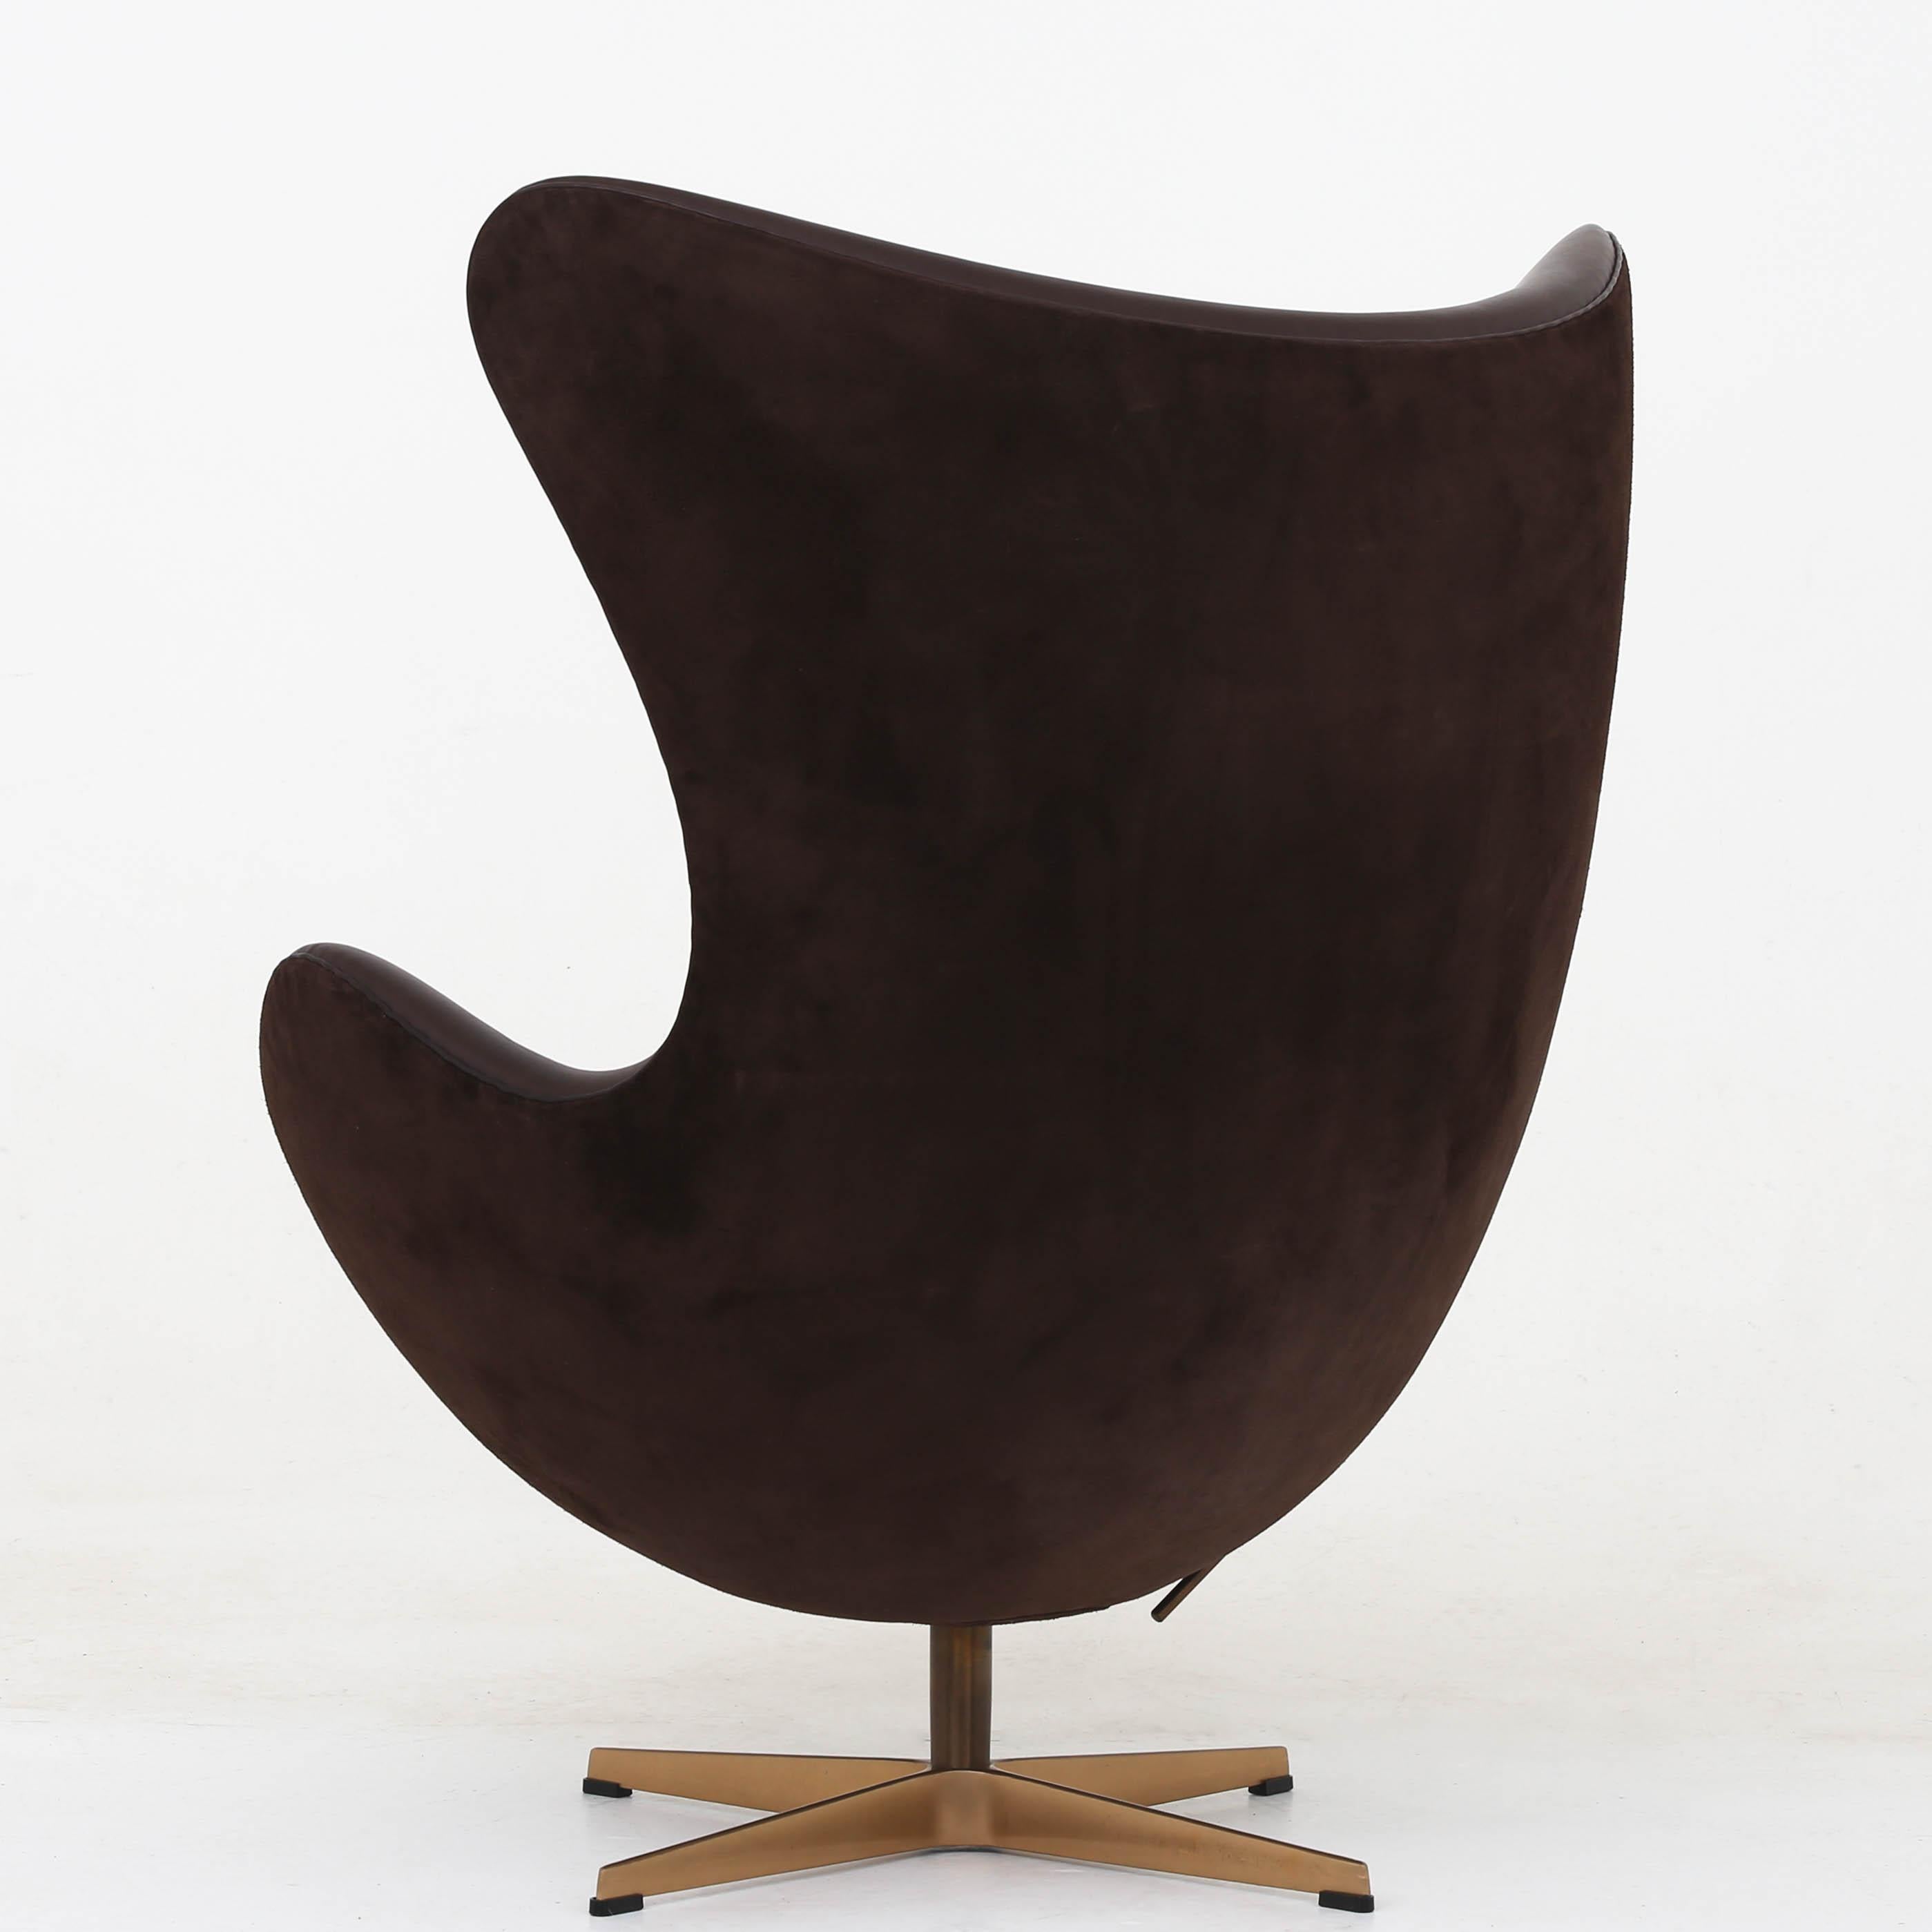 AJ 3316 - 'Golden Egg' lounge chair (anniversary model) in Elegance Mocca aniline leather, suede and base of hand-polished bronze. Produced 999 pieces, of which this is no. 518. Maker Fritz Hansen.